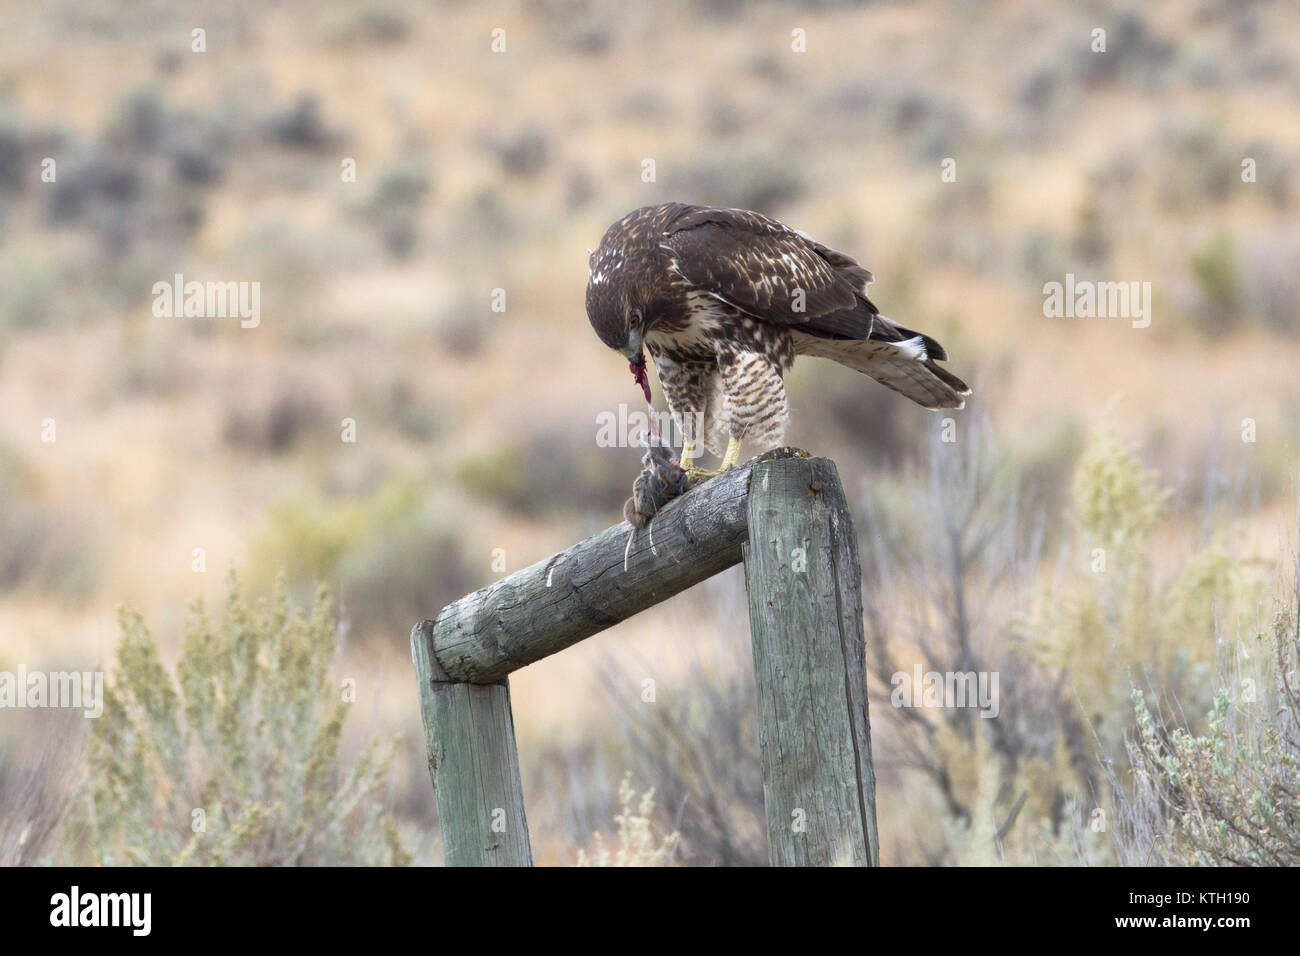 Red-tailed Hawk eating prey in British Columbia, Canada. Stock Photo